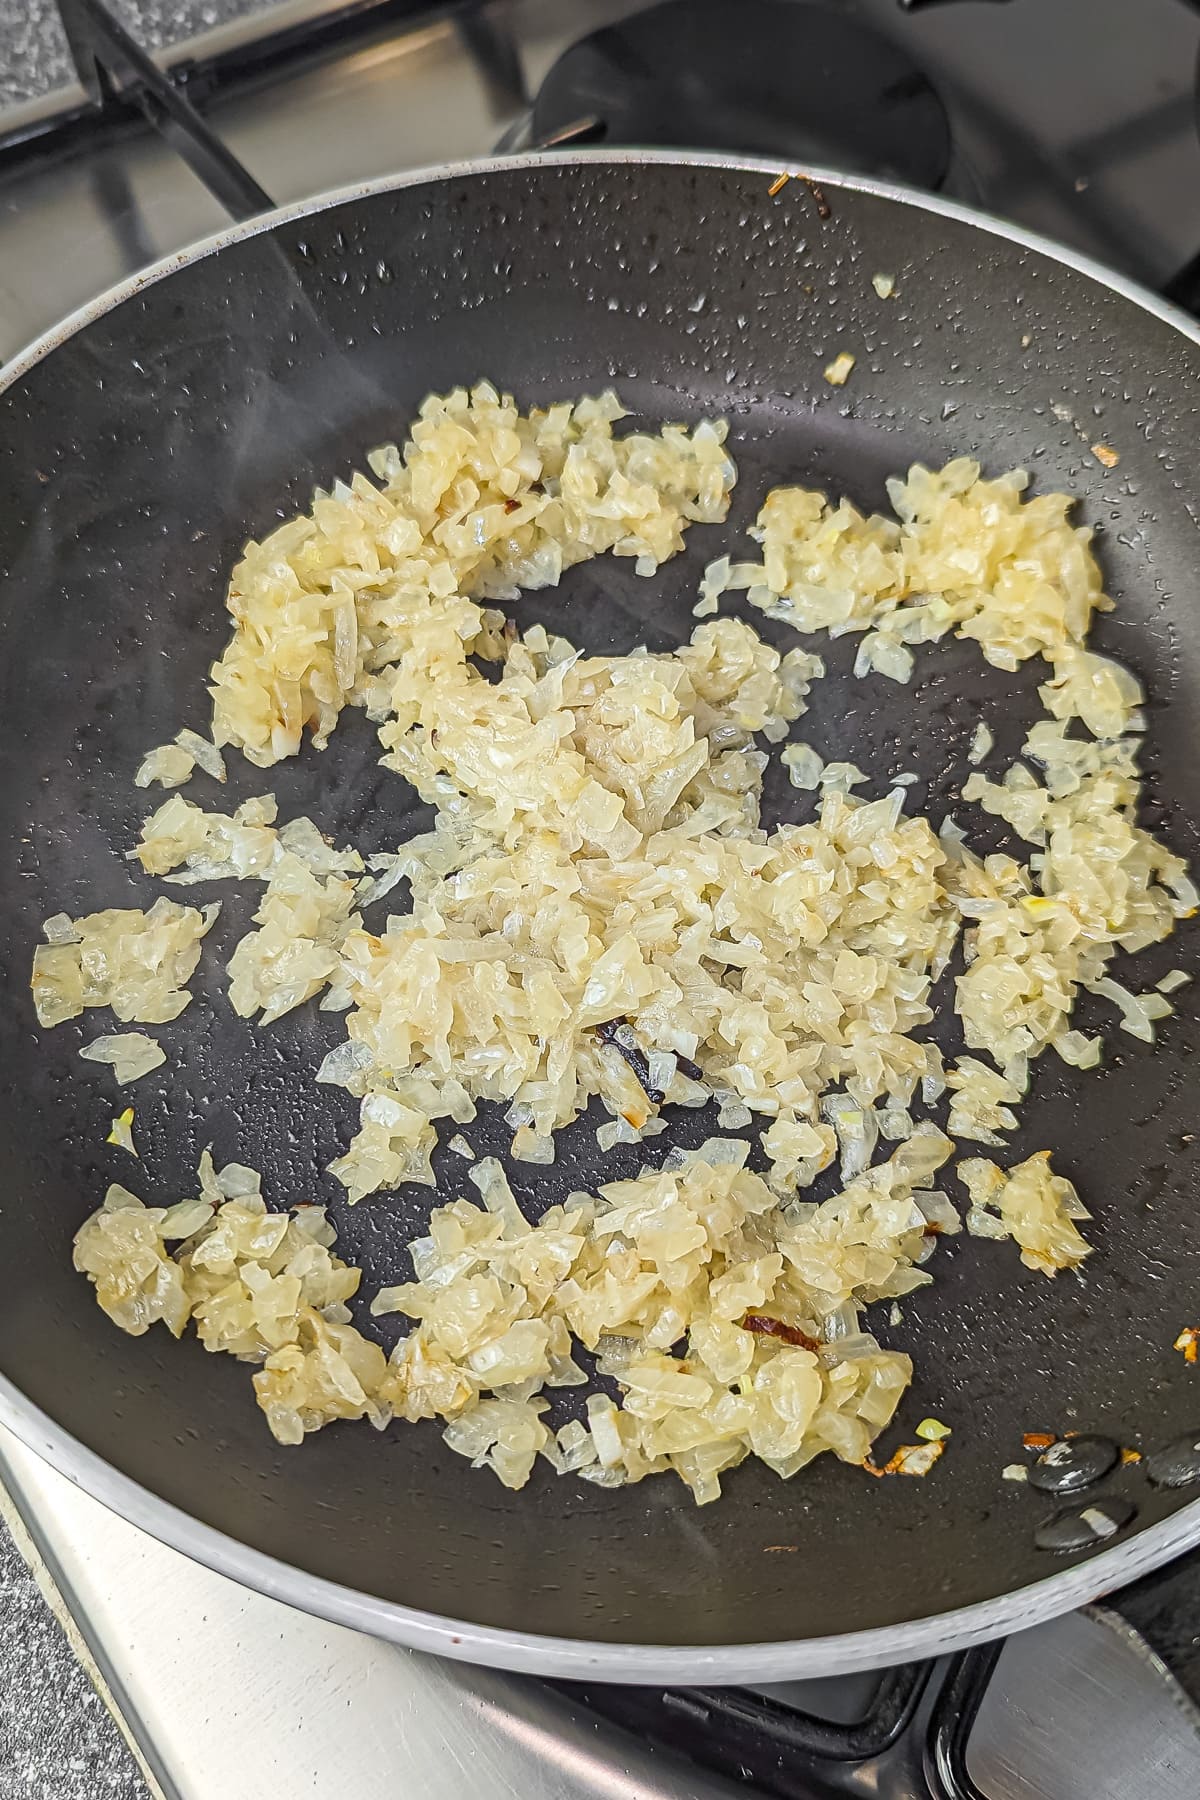 Sautéed golden onions in a pan, ready for more ingredients.